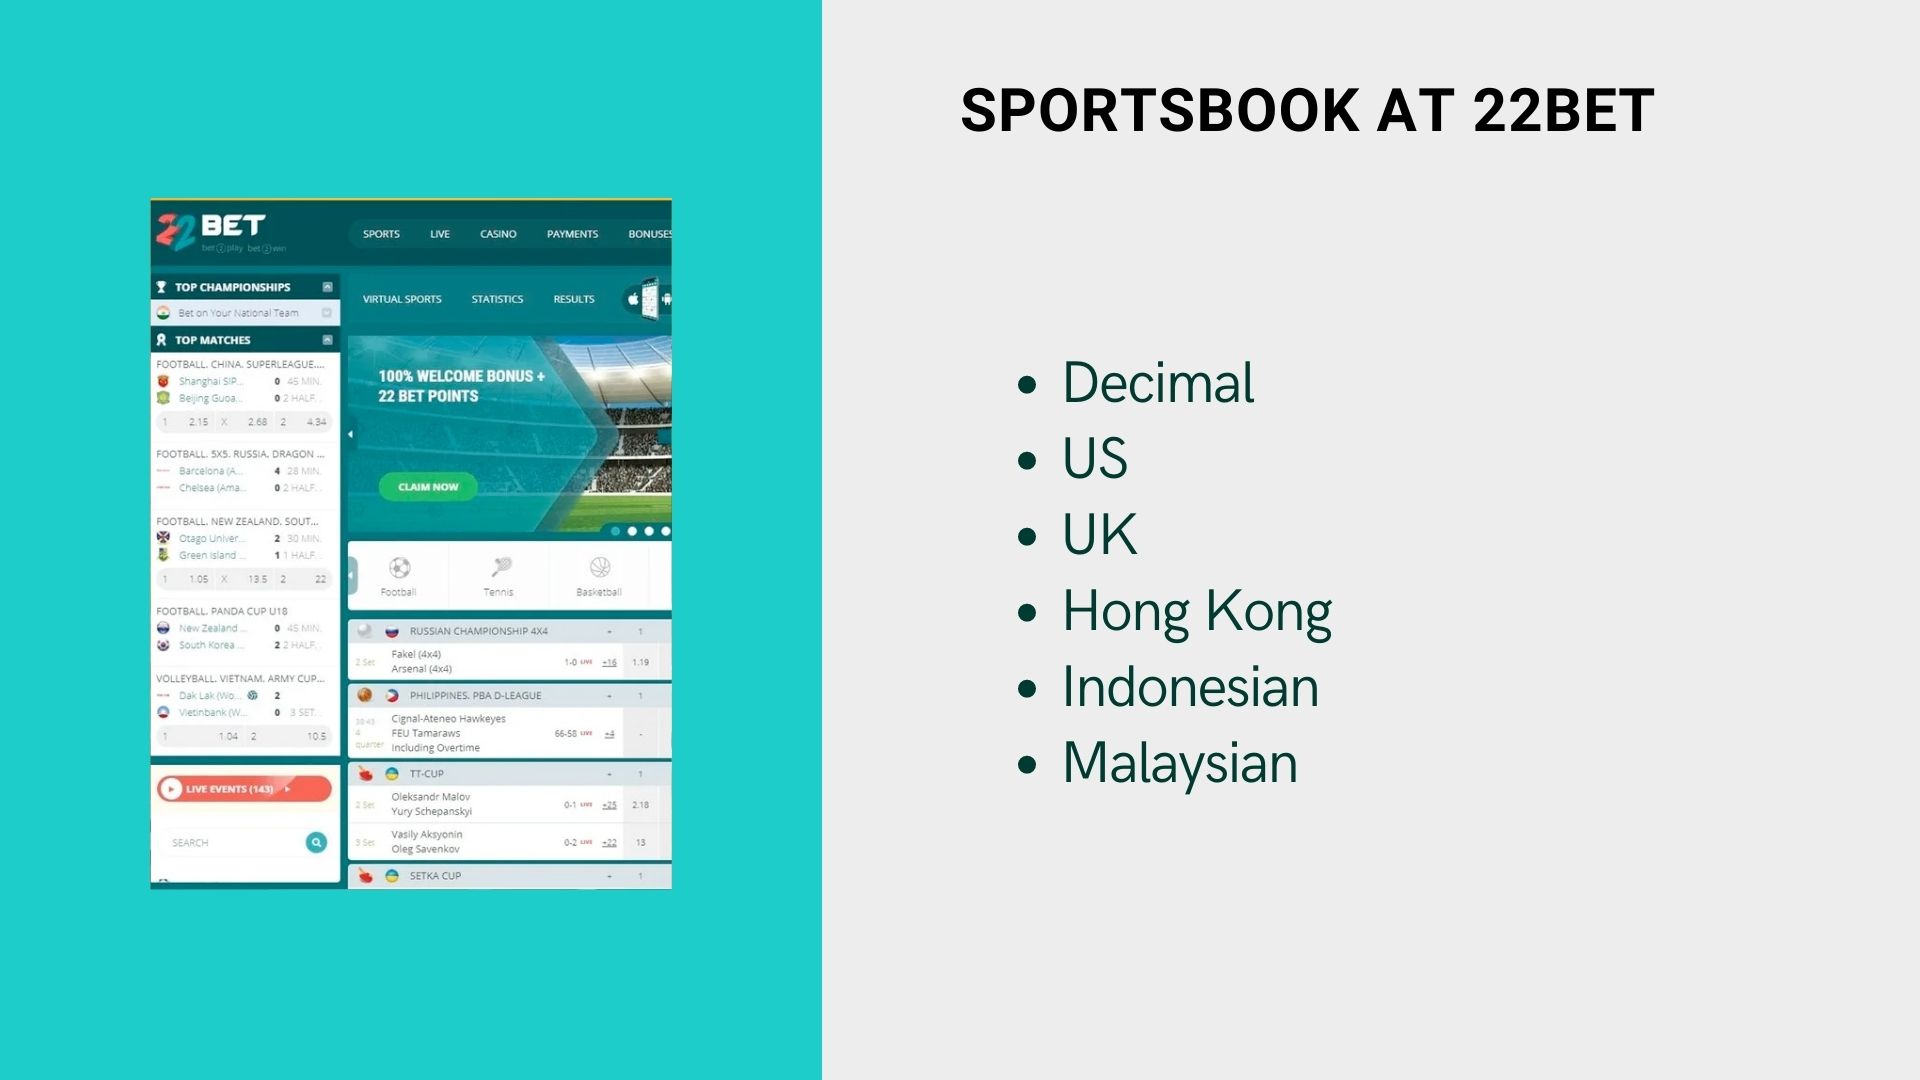 Sportsbook at 22bet